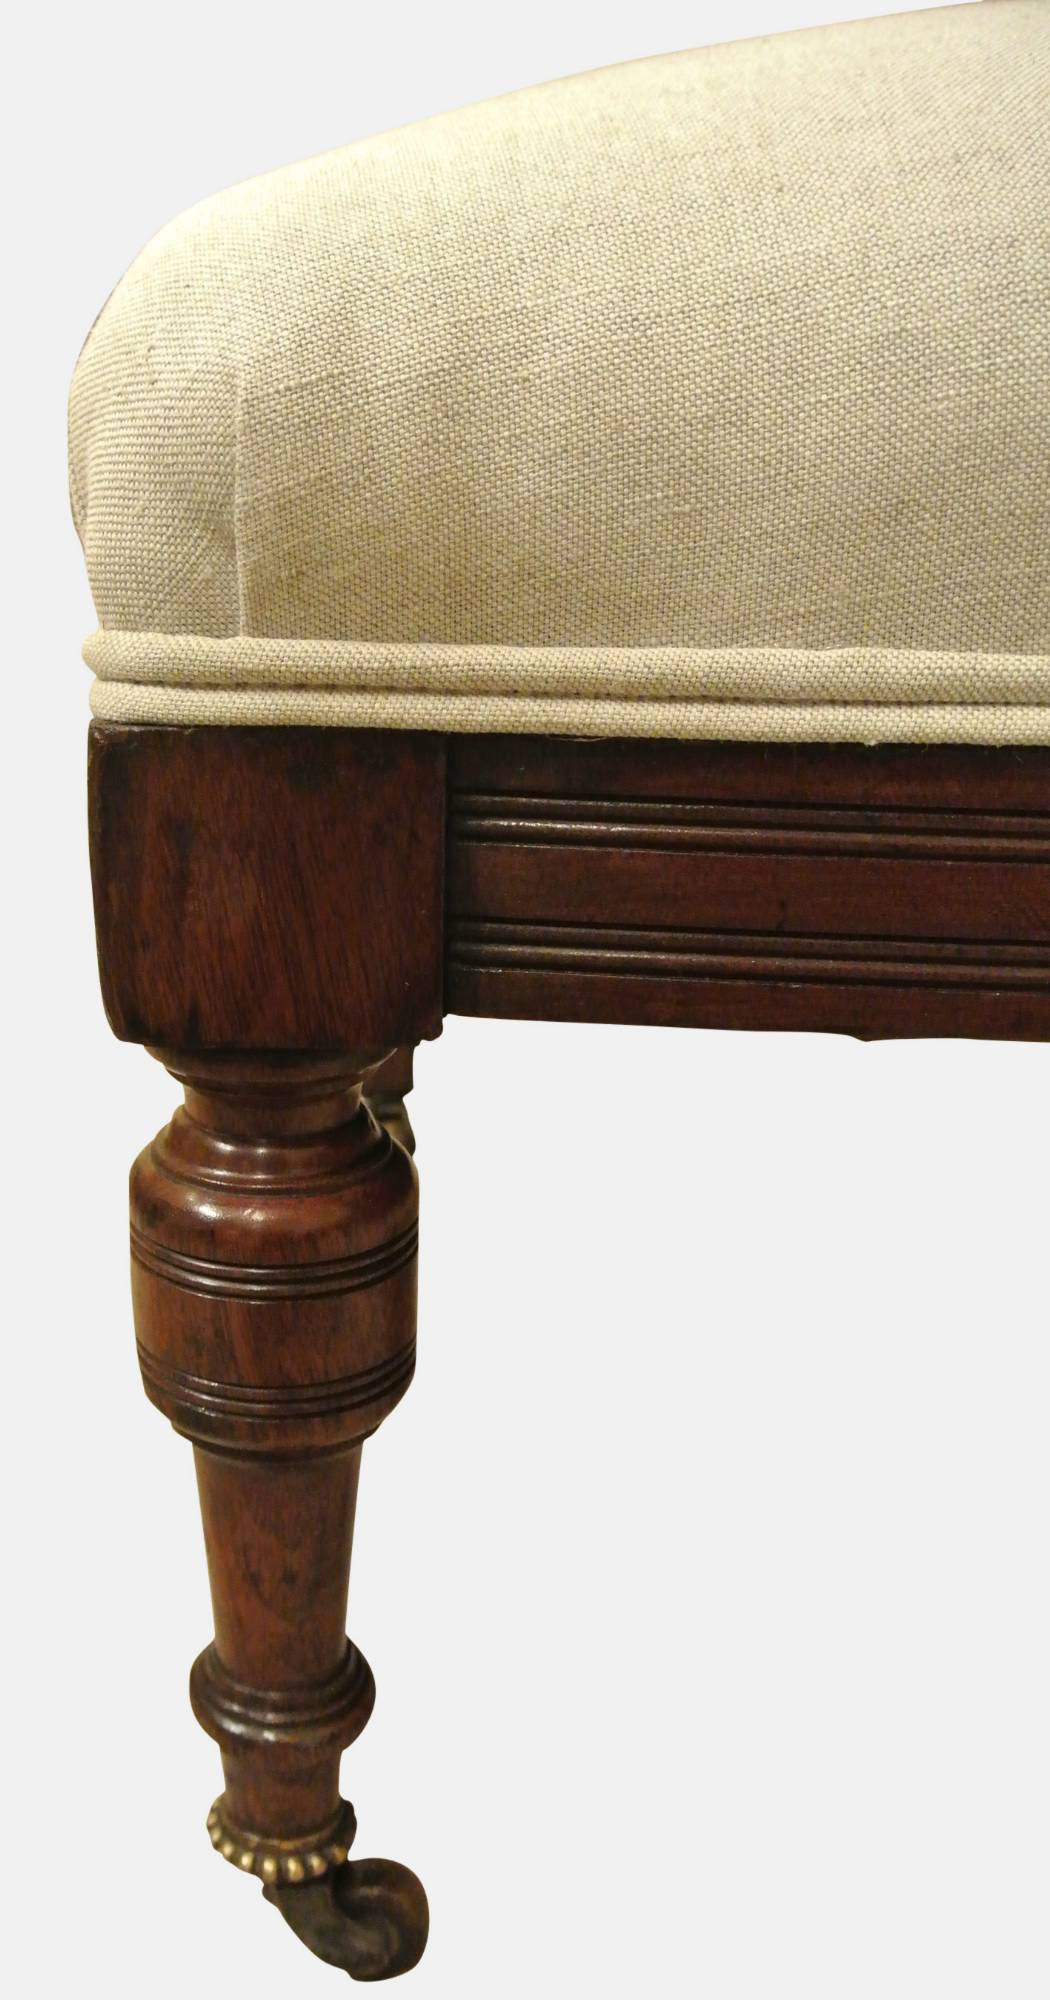 A handsome pair of late Victorian mahogany bedroom chairs reupholstered in a contemporary linen fabric.